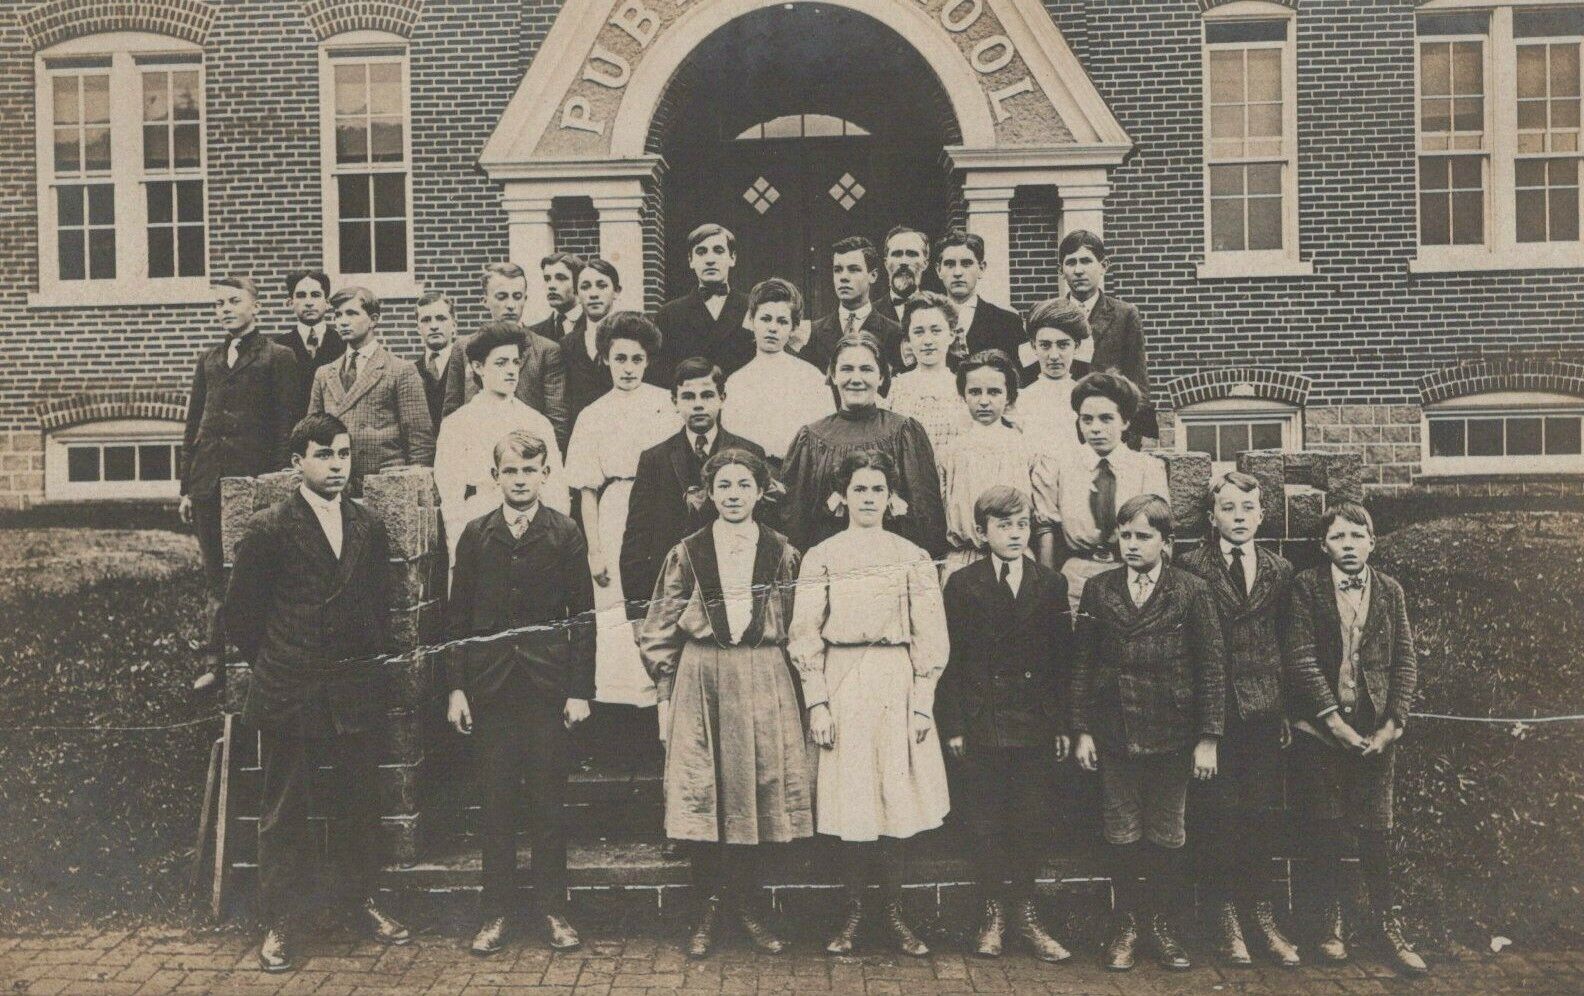 Public School Class Posed In Front Of School Vintage Real Photo RPPC Post Card